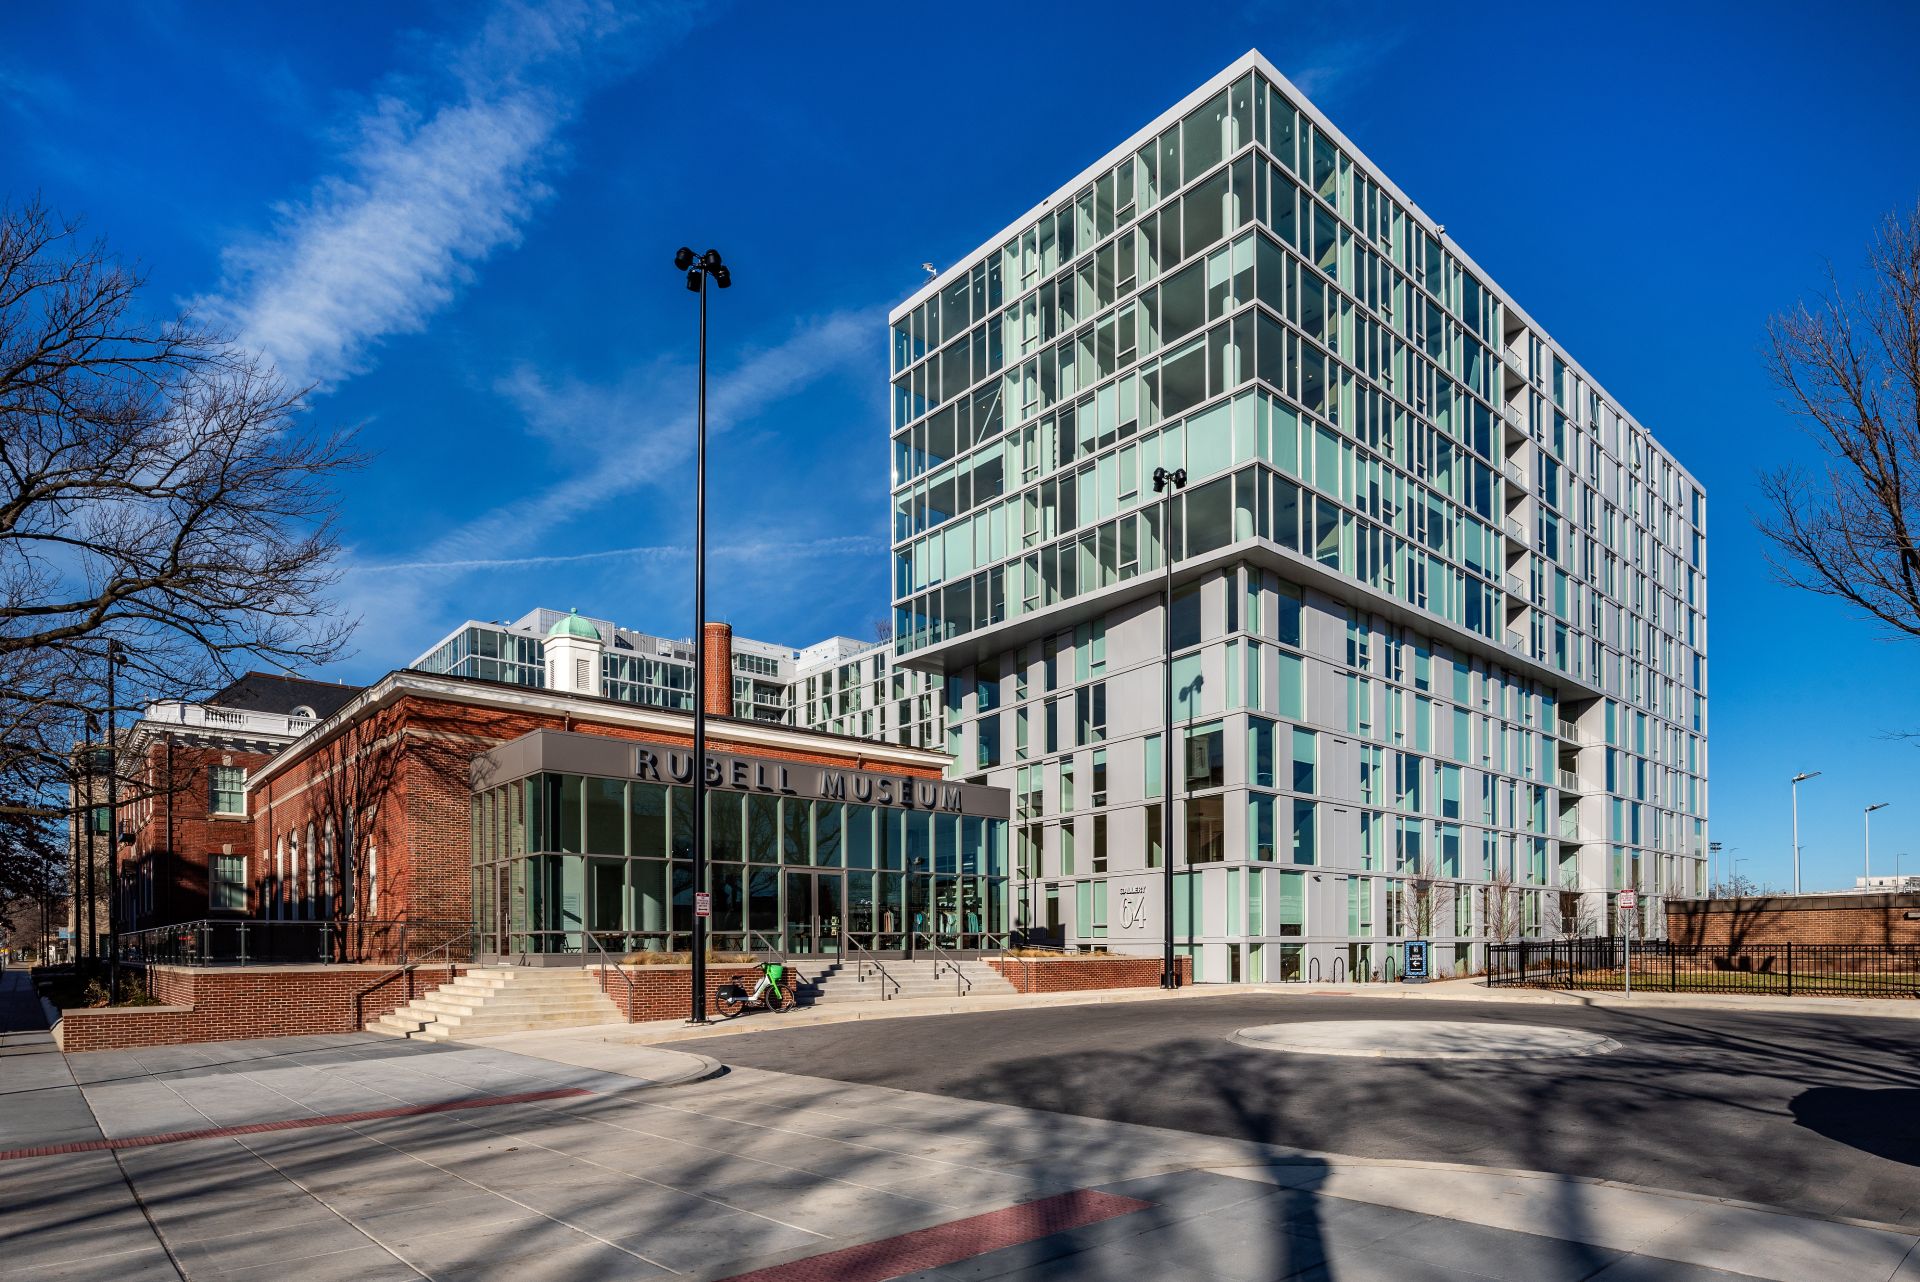 Gallery 64 Achieves DC’s First LEED Platinum Certification